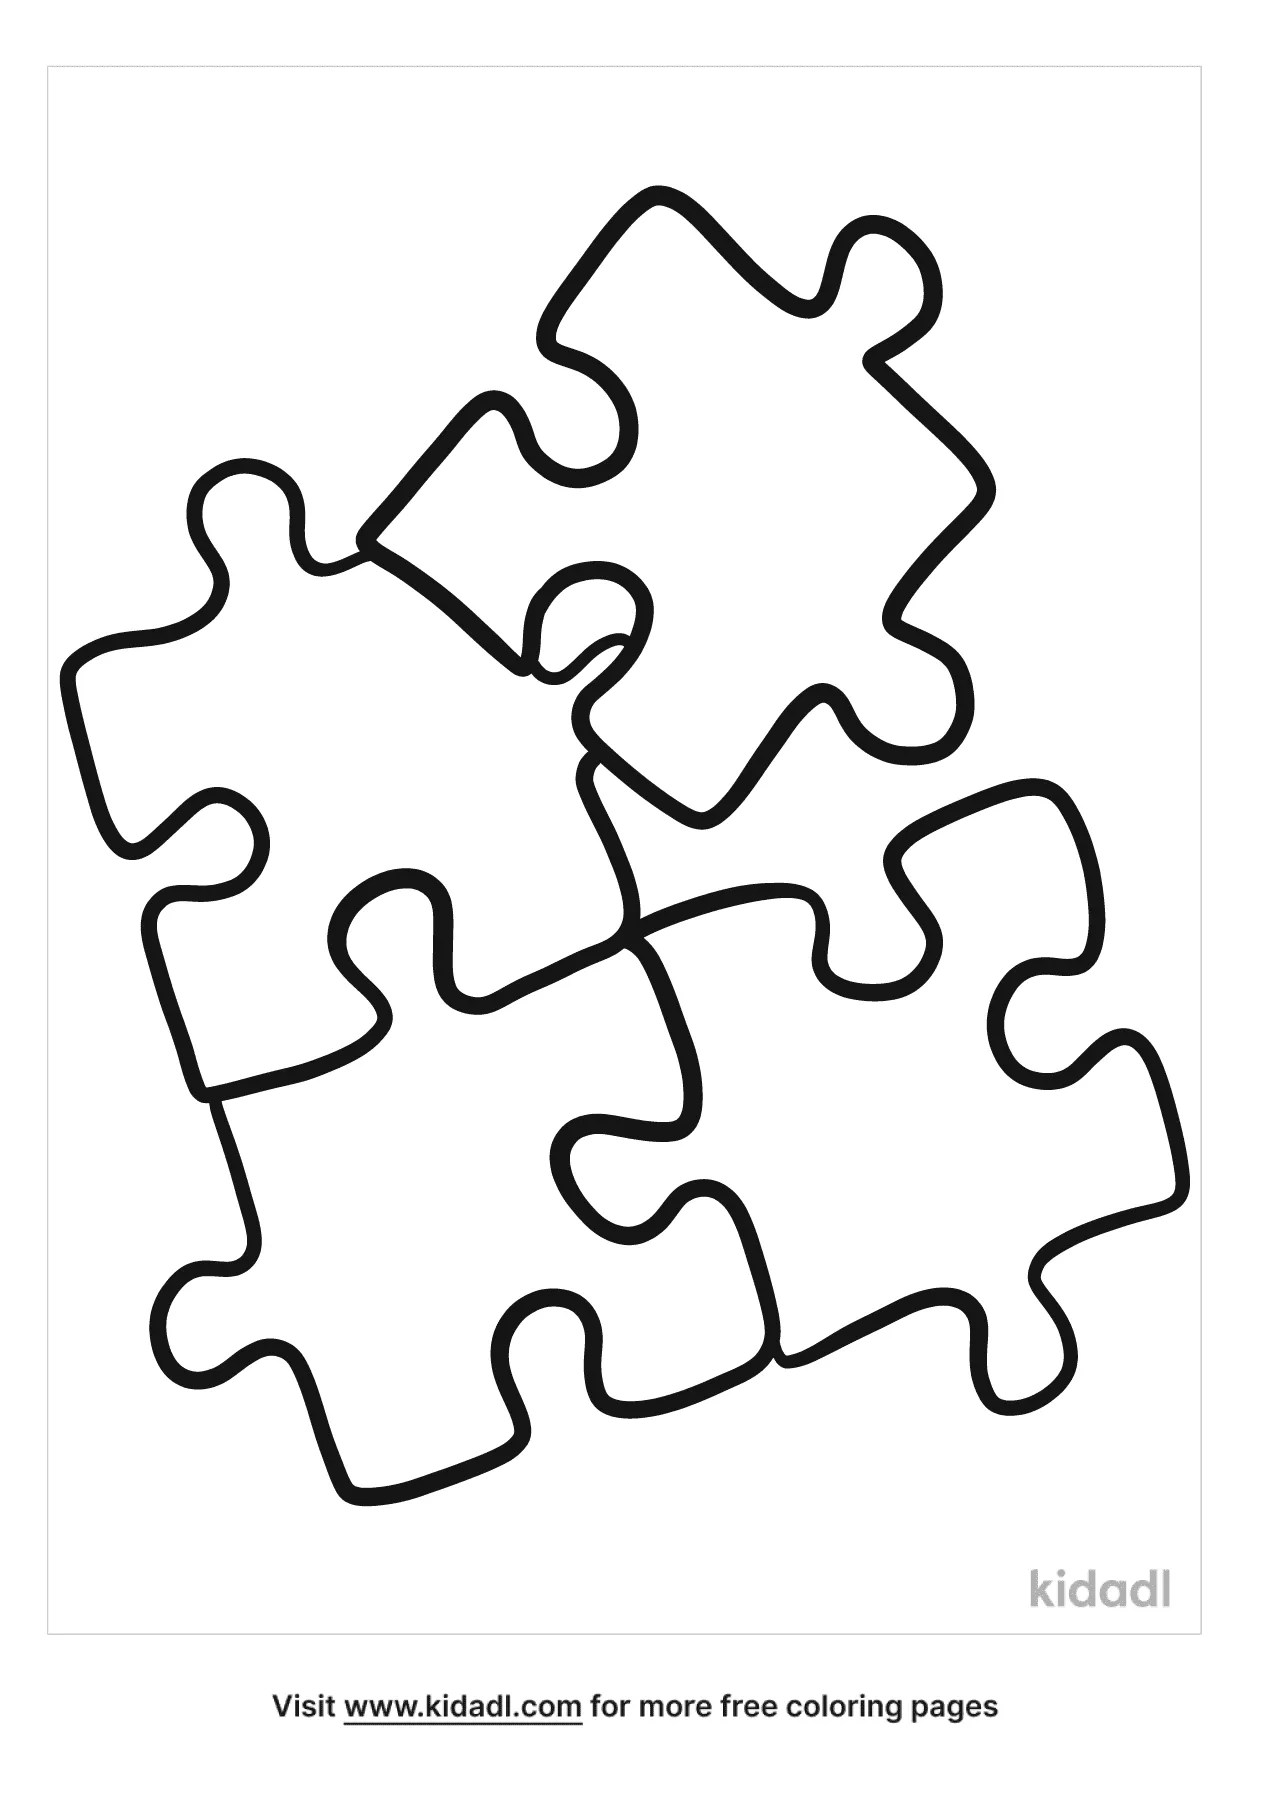 Puzzle Coloring Page 0 